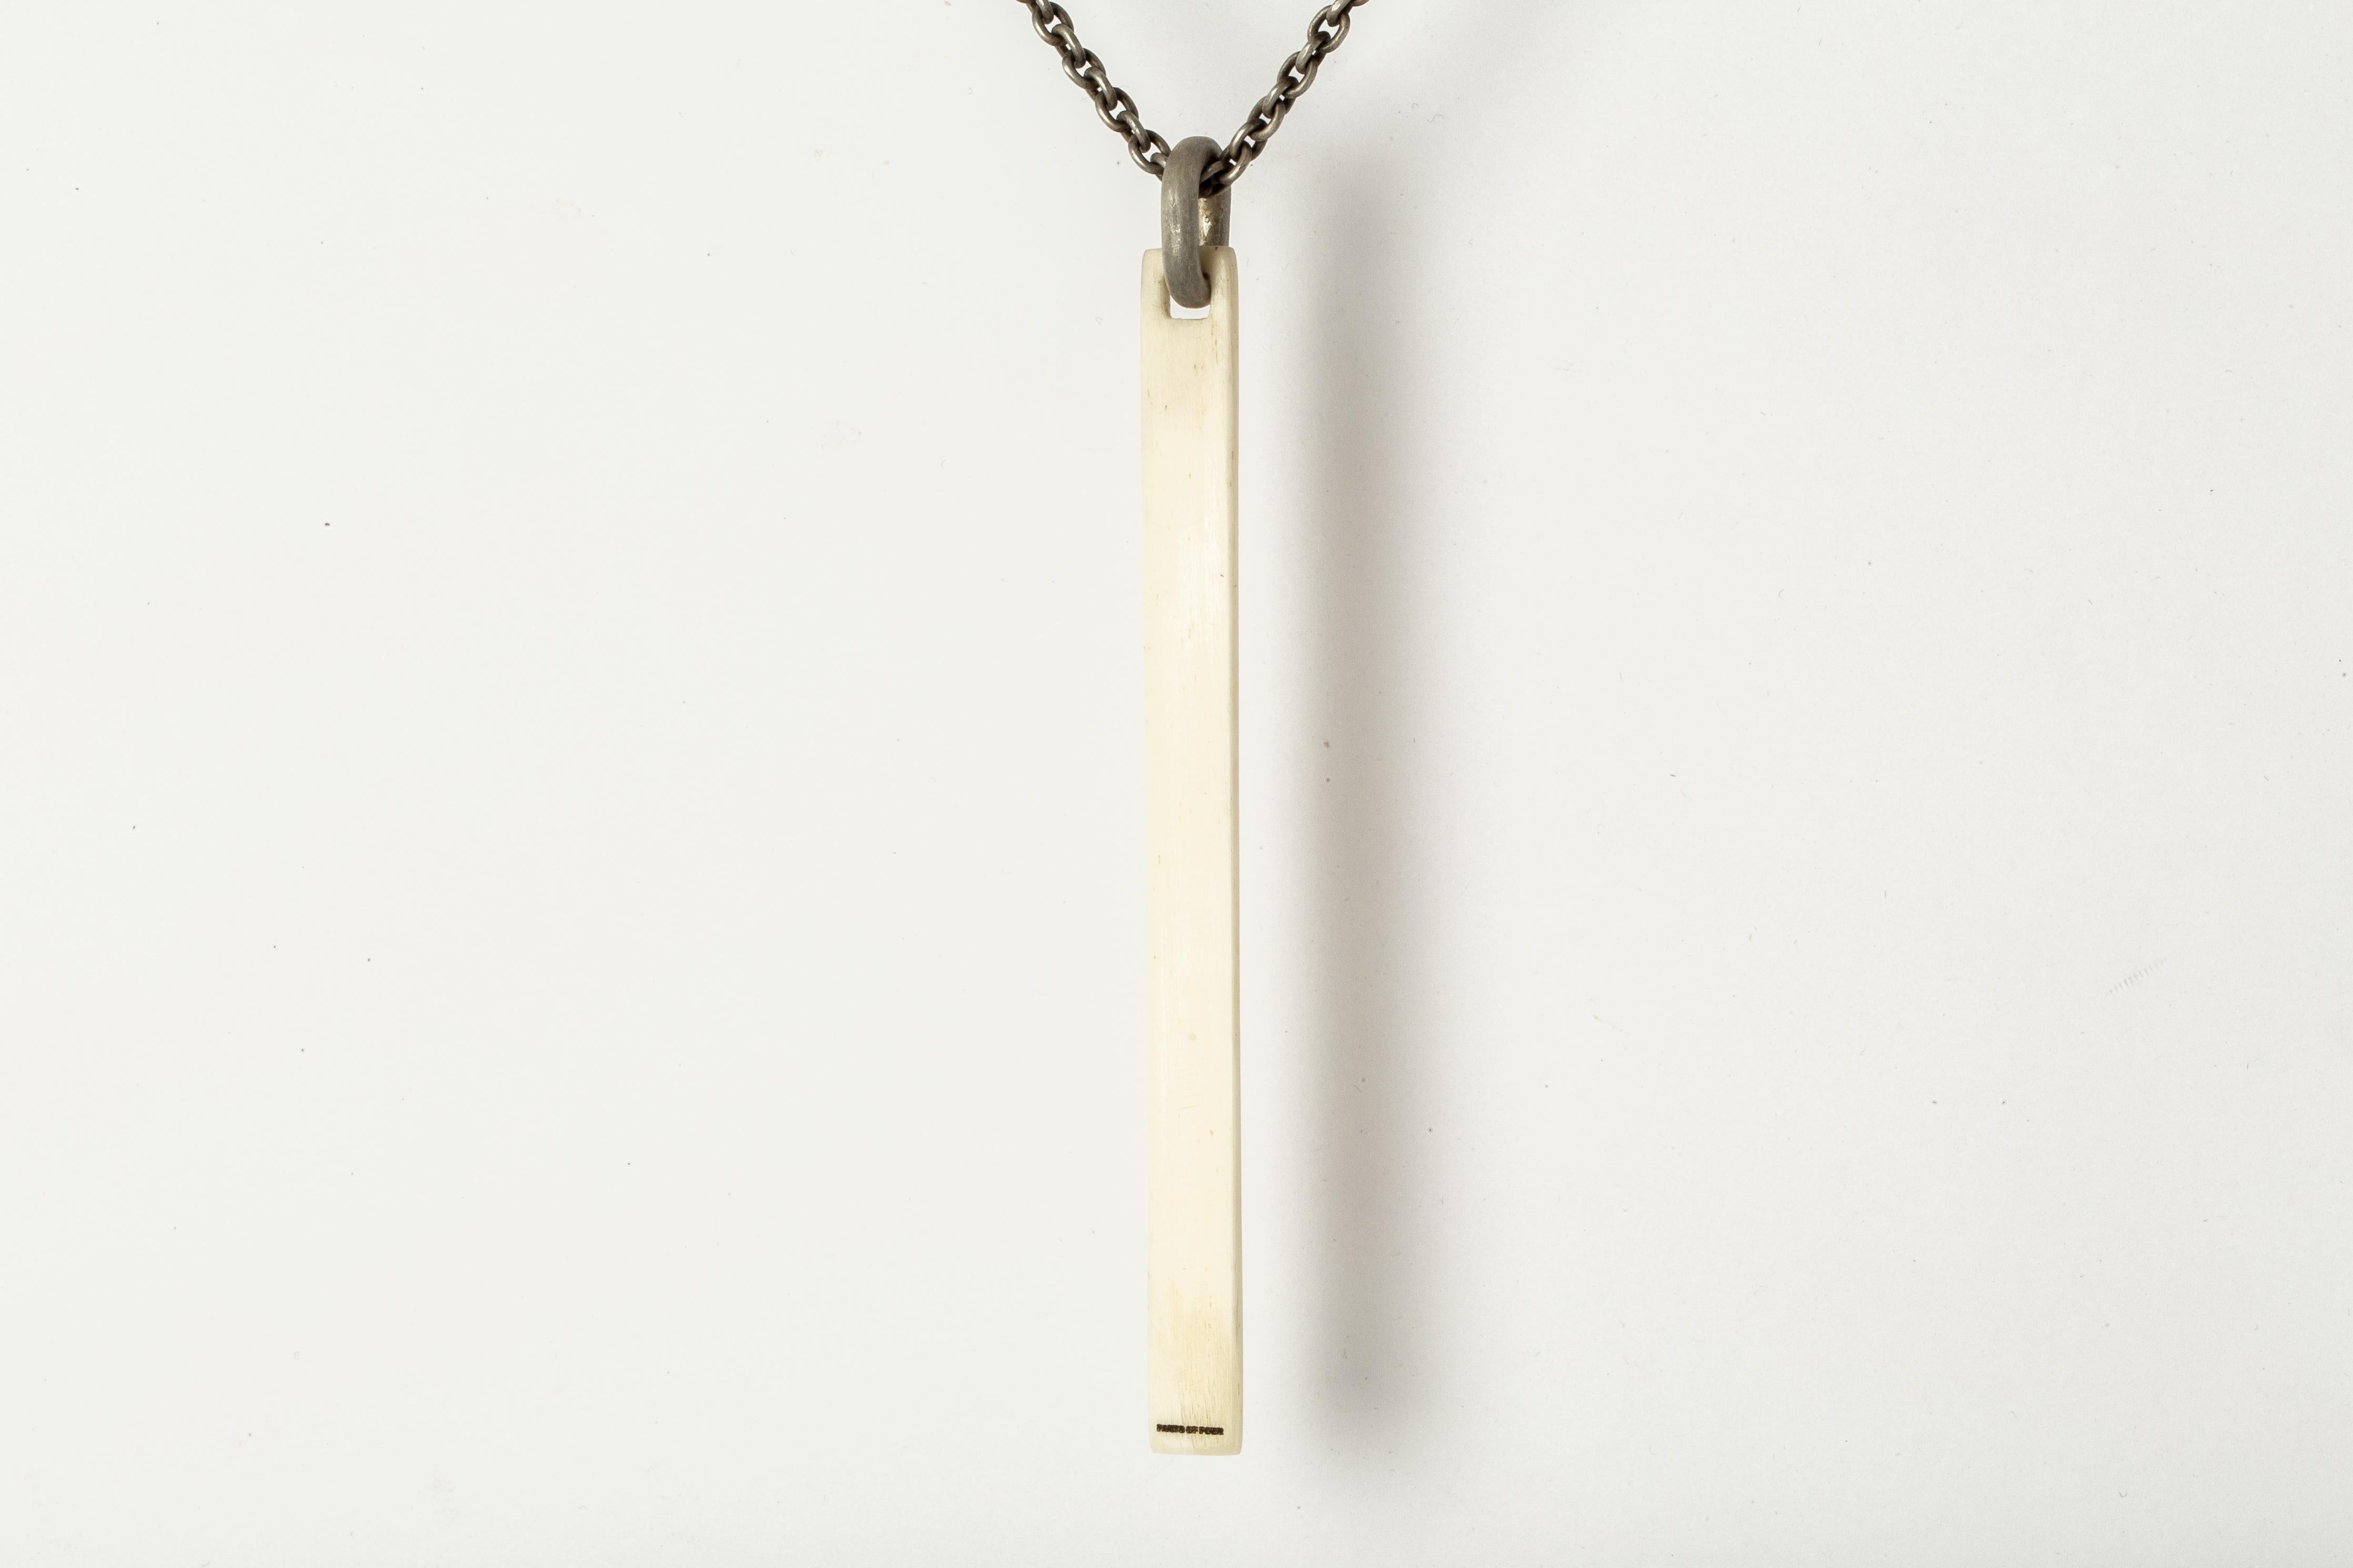 Handcarved plate necklace made of buffalo bone, it comes on a 74cm sterling silver chain.